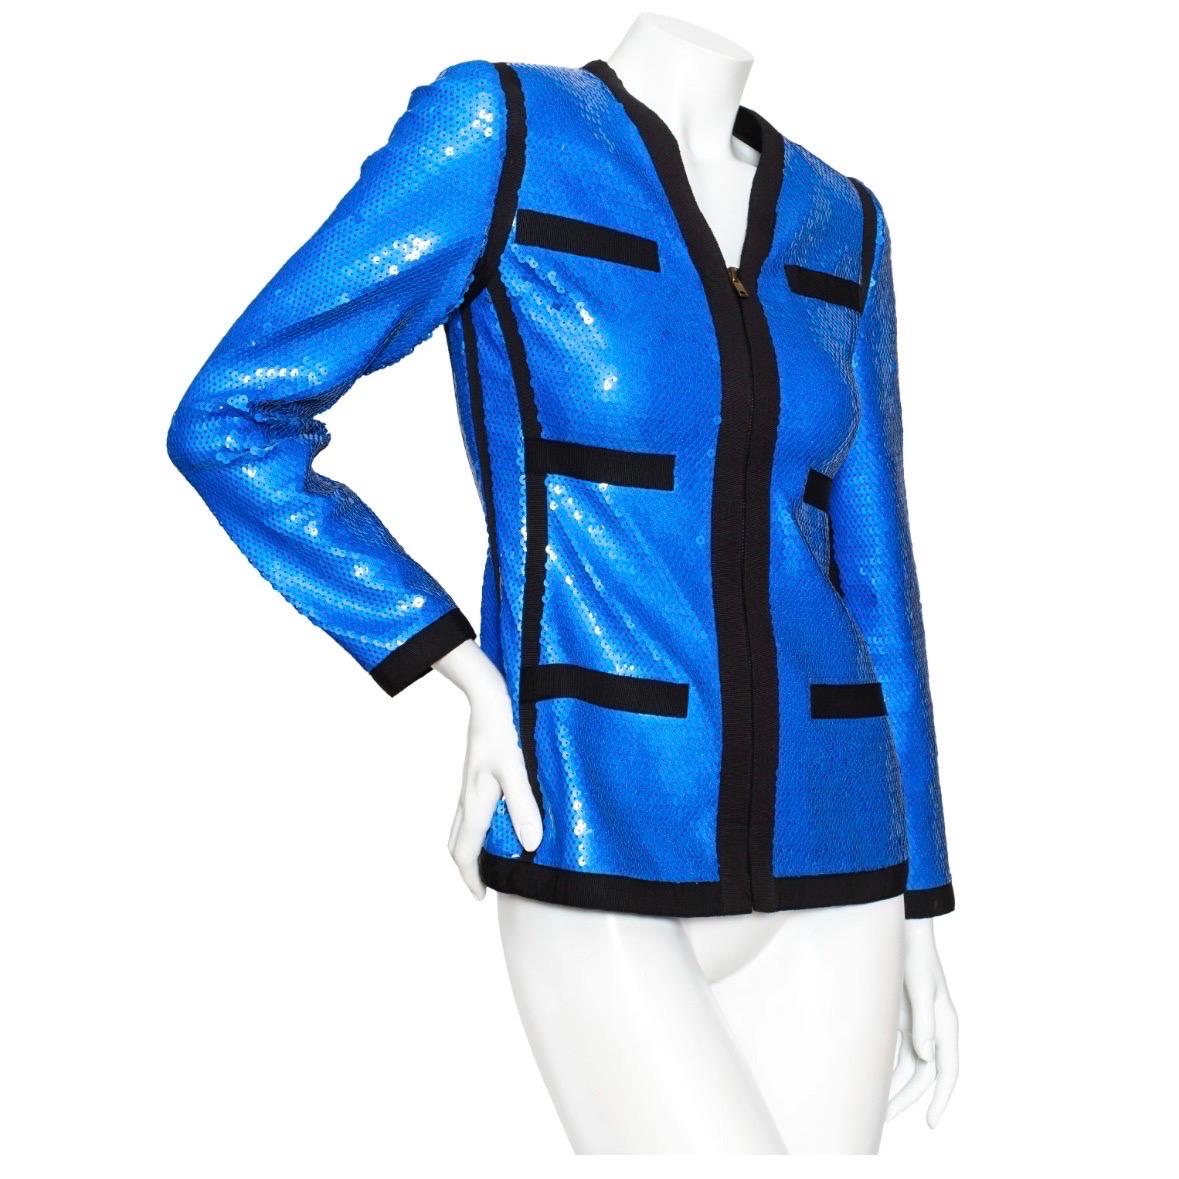 Chanel 1991 Blue Sequin Black Grosgrain Scuba Jacket

Spring/Summer 1991 Collection; Collection 25 by Karl Lagerfeld 
Style worn by Linda Evangelista during iconic Fall 1990 runway dubbed 